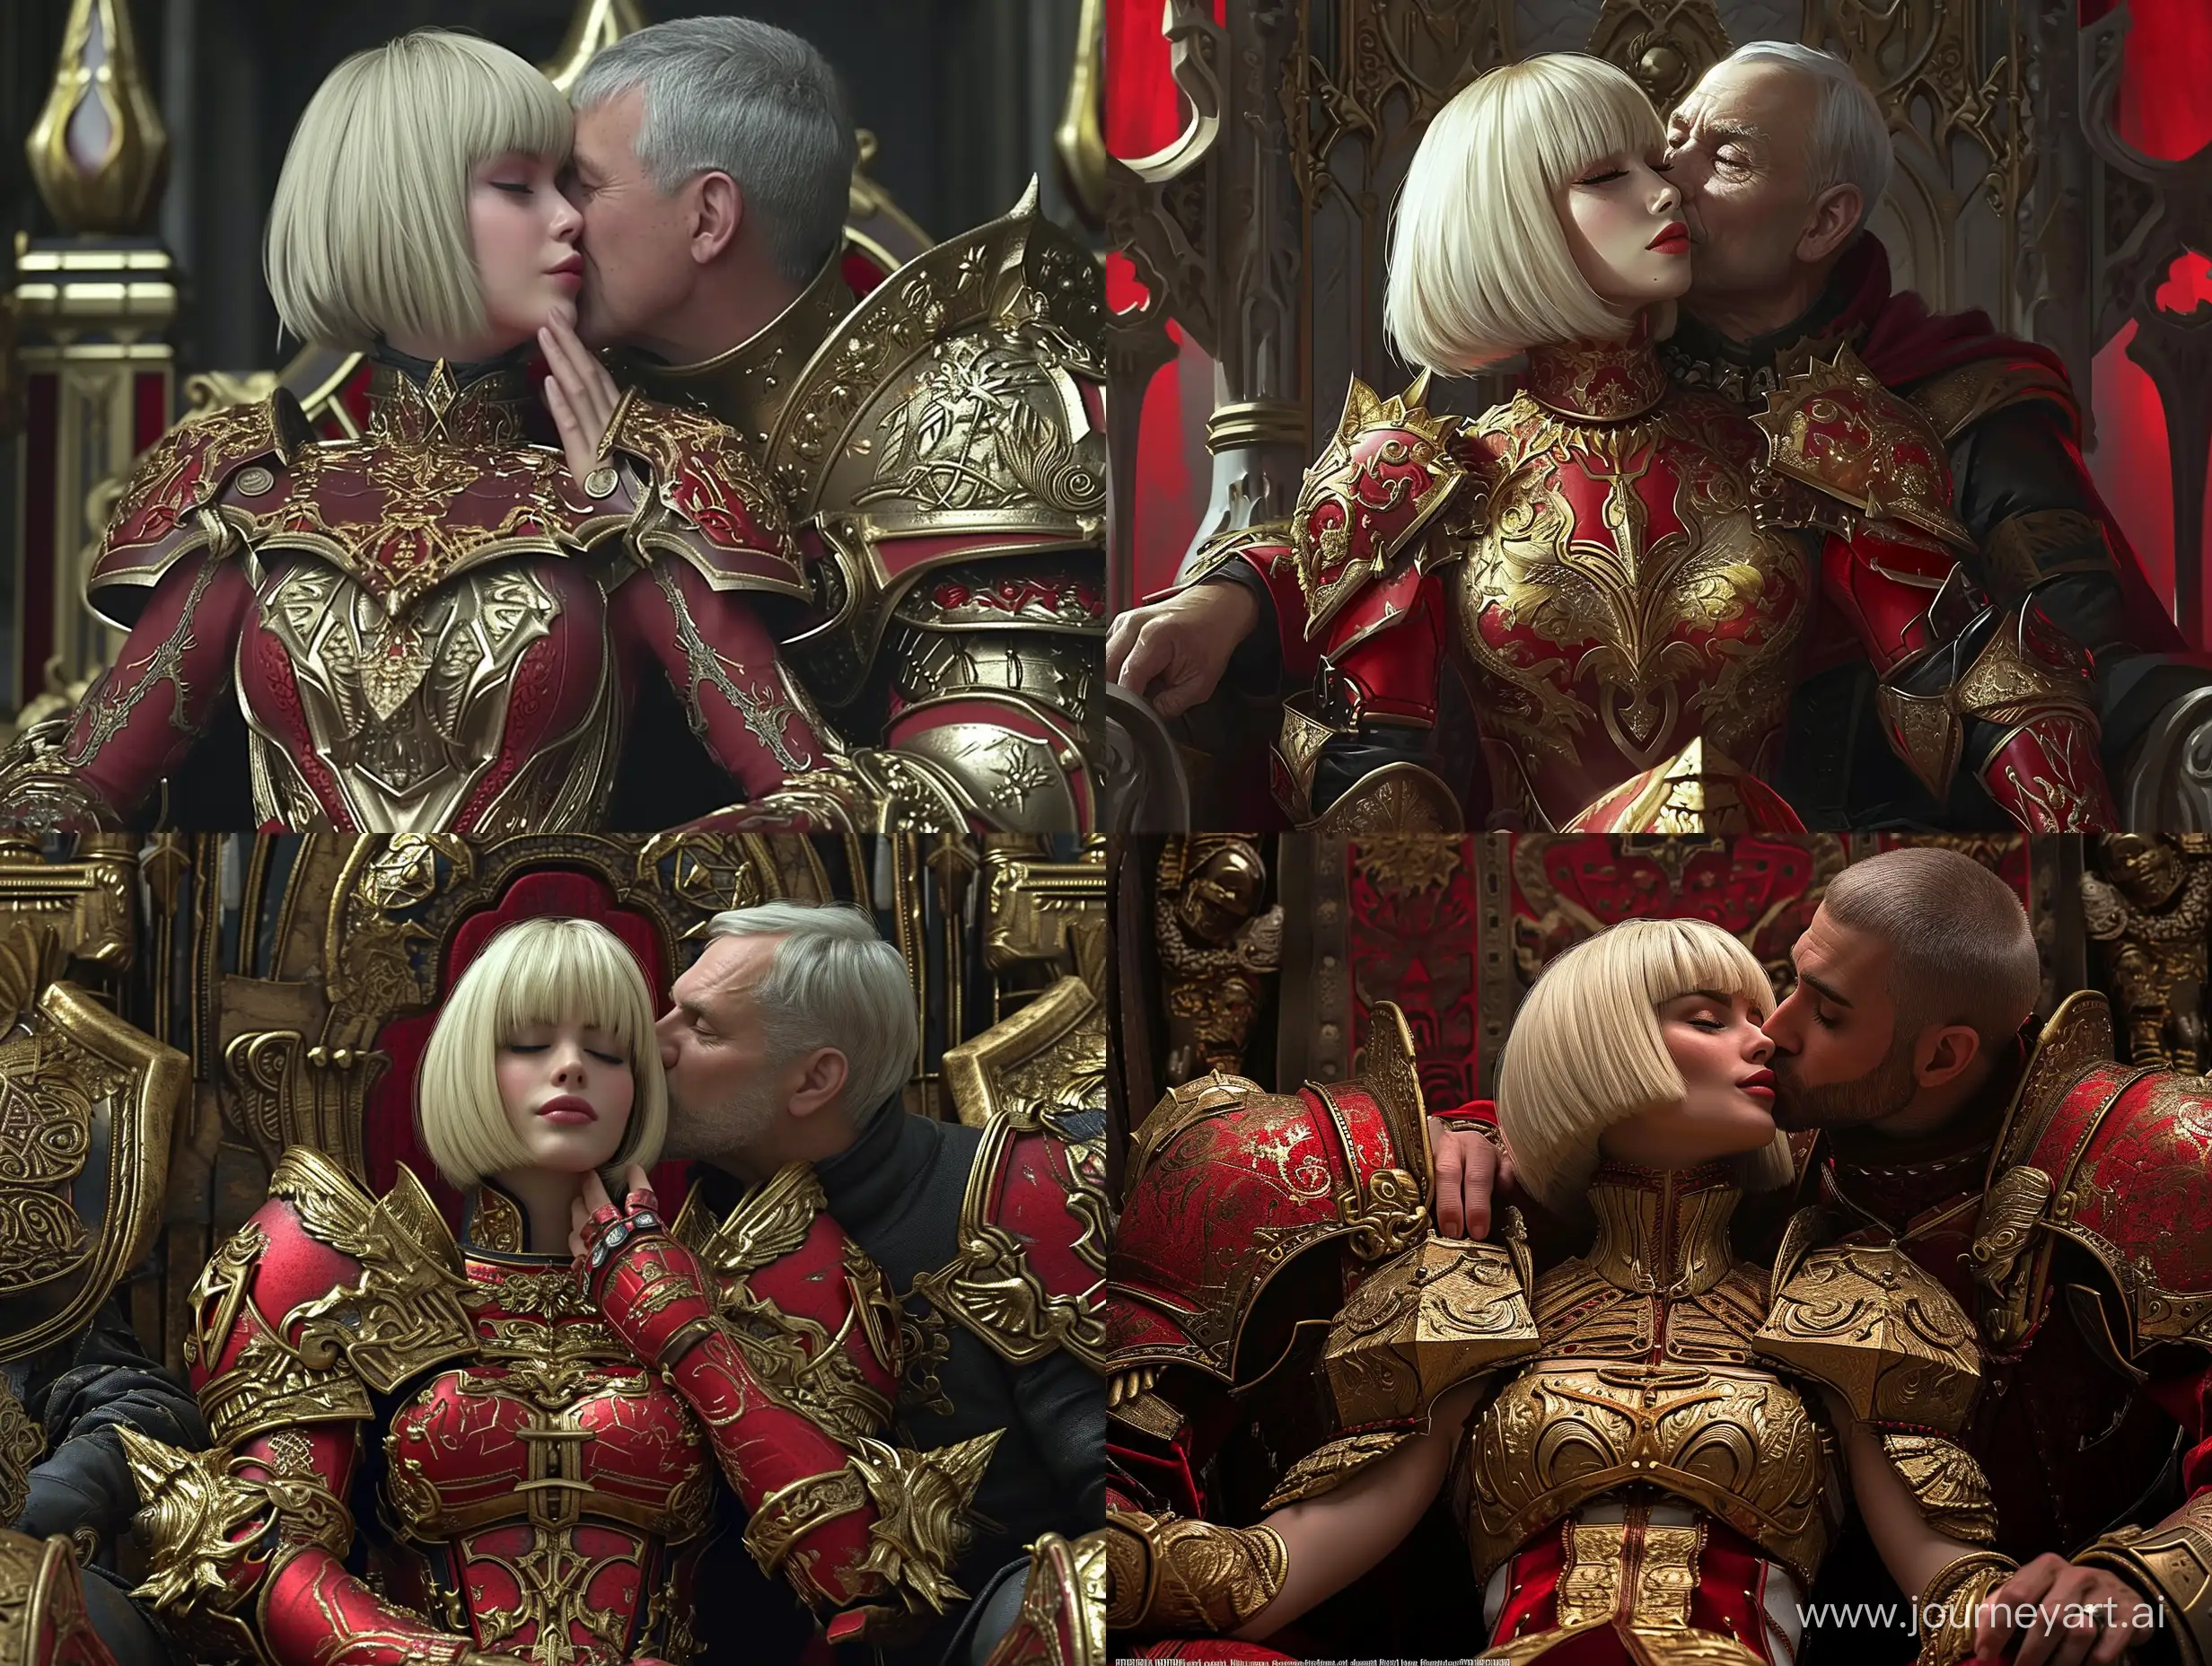 coronation, warrior princess, blonde hair, bob cut with no fringe, sitting on throne, father hand kiss, strong expression, ornate armor, red and gold, photorealistic, highly detailed